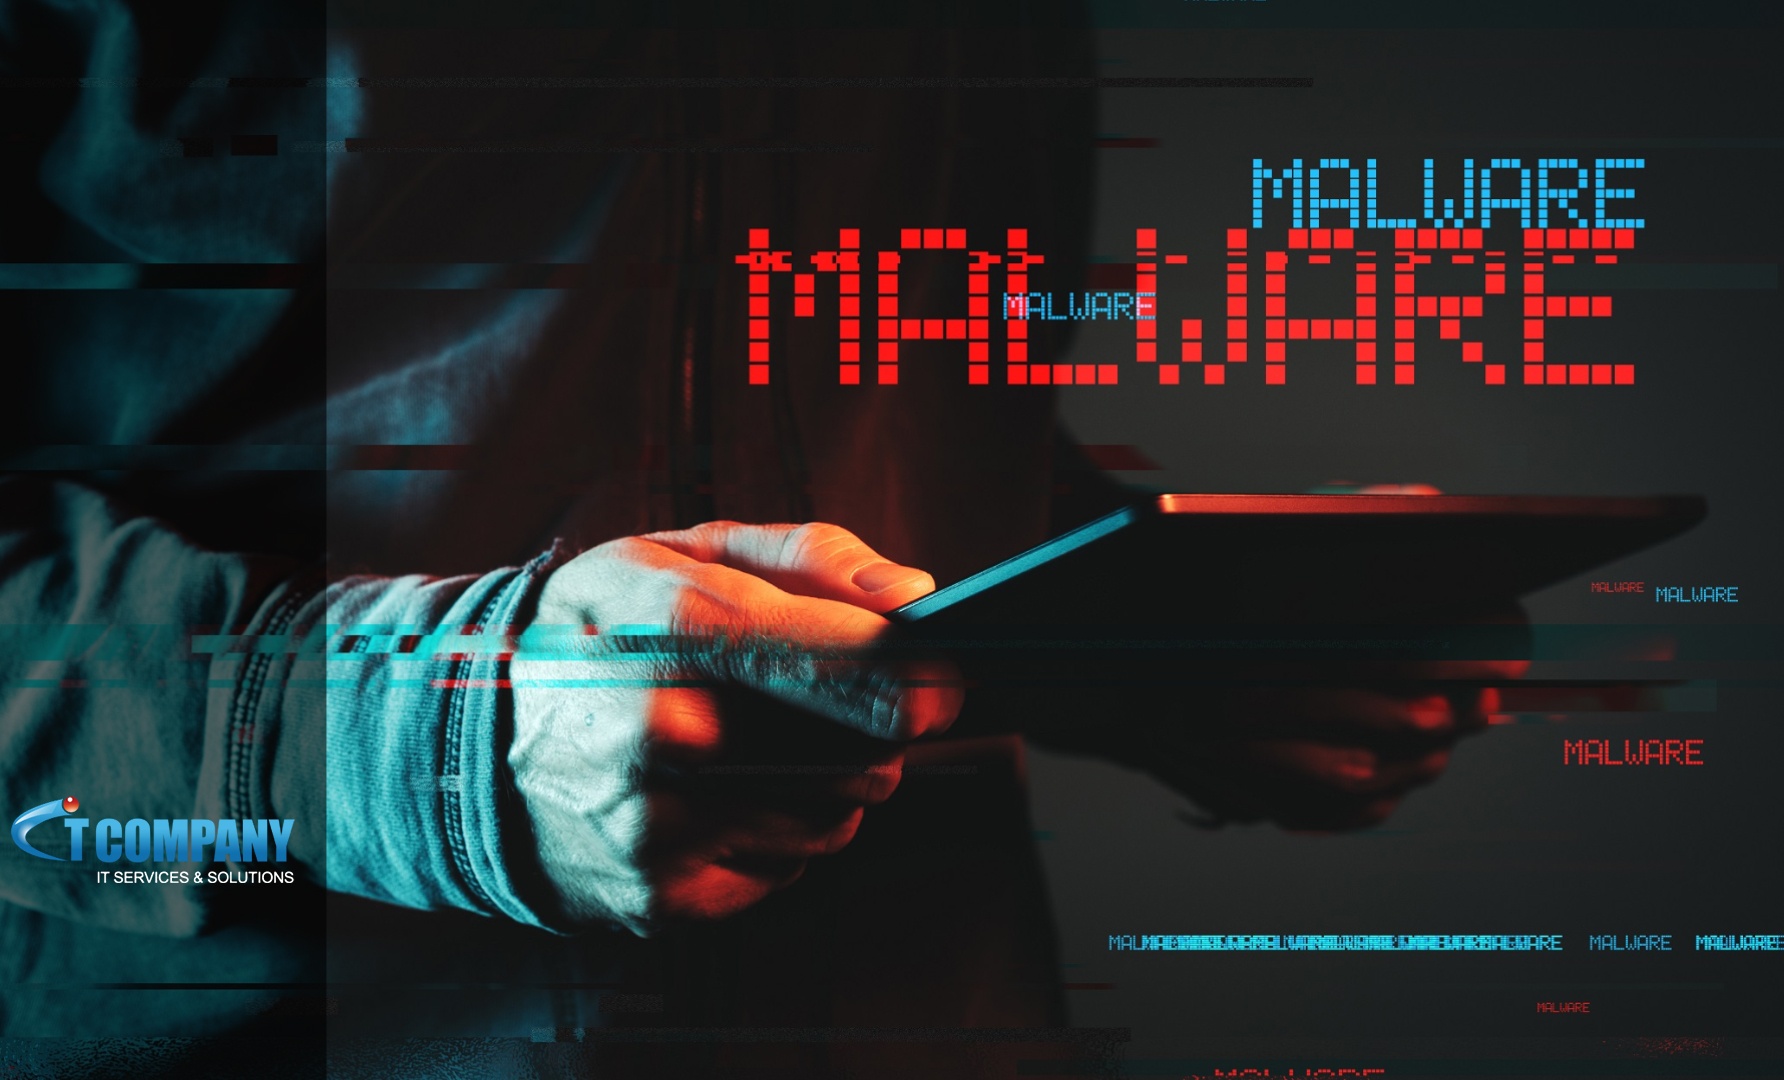 The deadly Android Malware even Google had alarmed its users